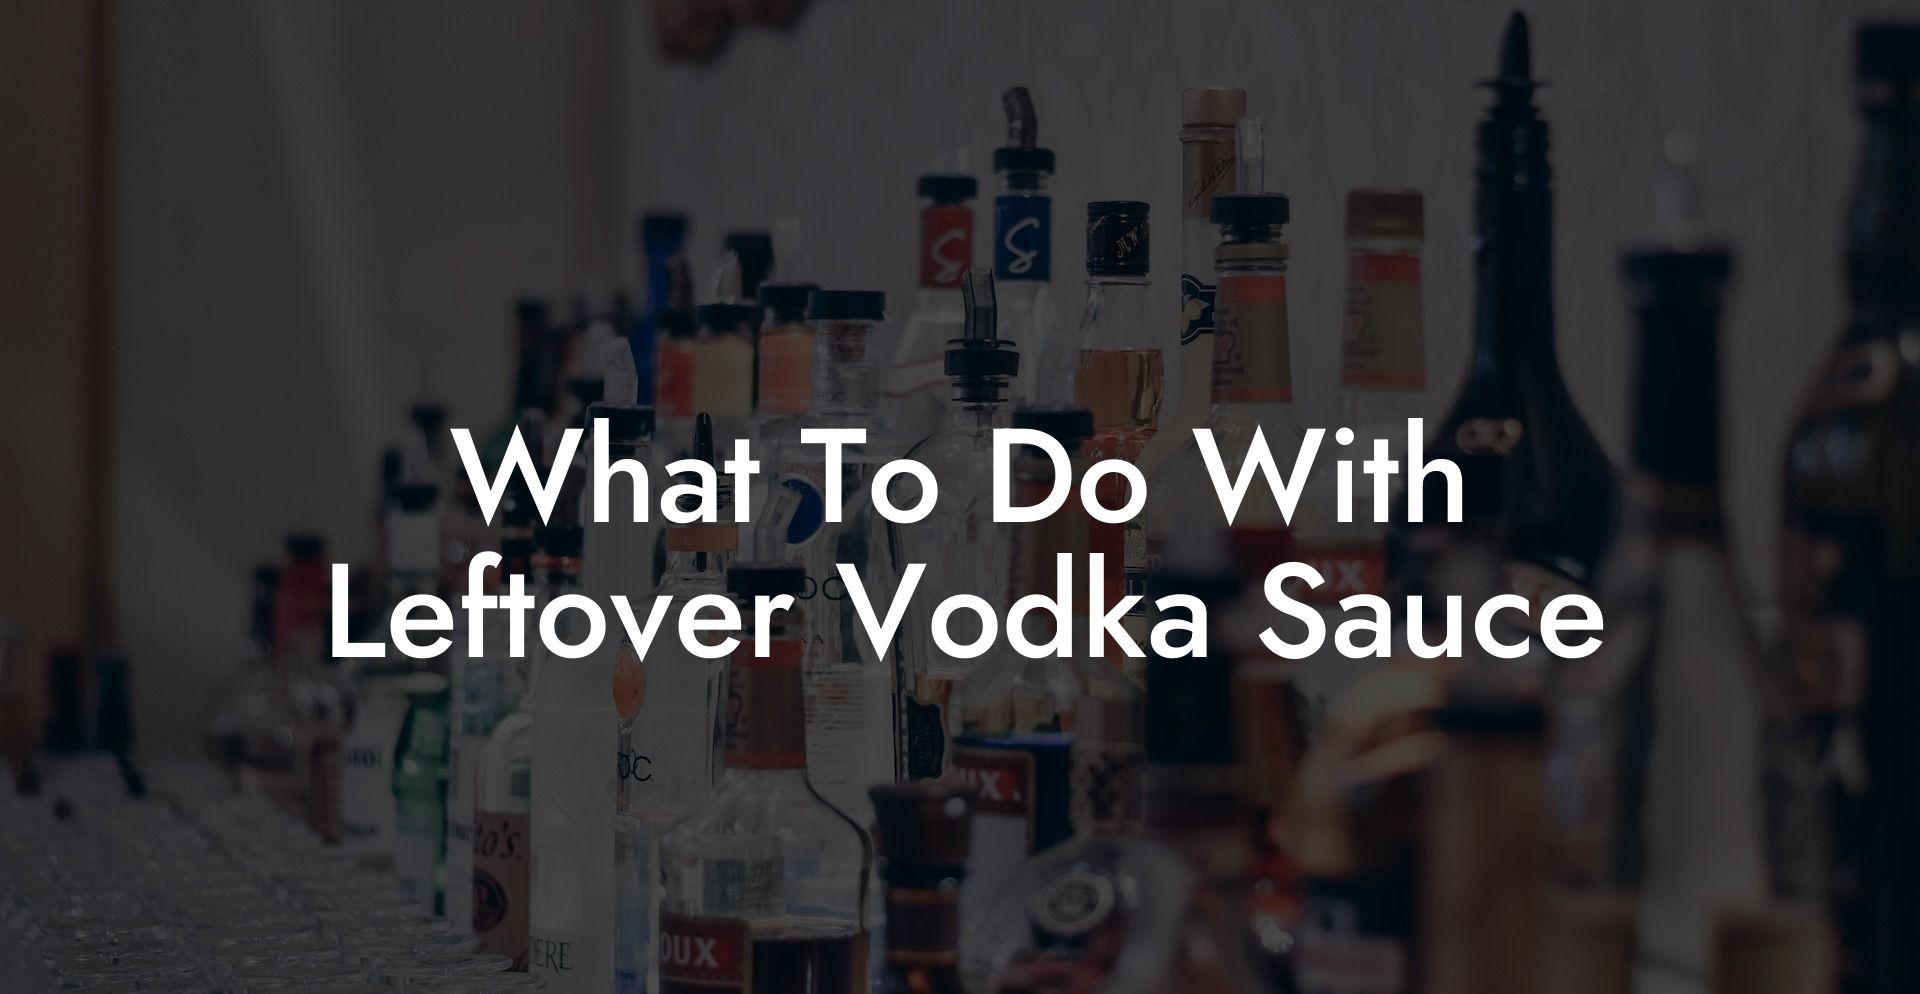 What To Do With Leftover Vodka Sauce